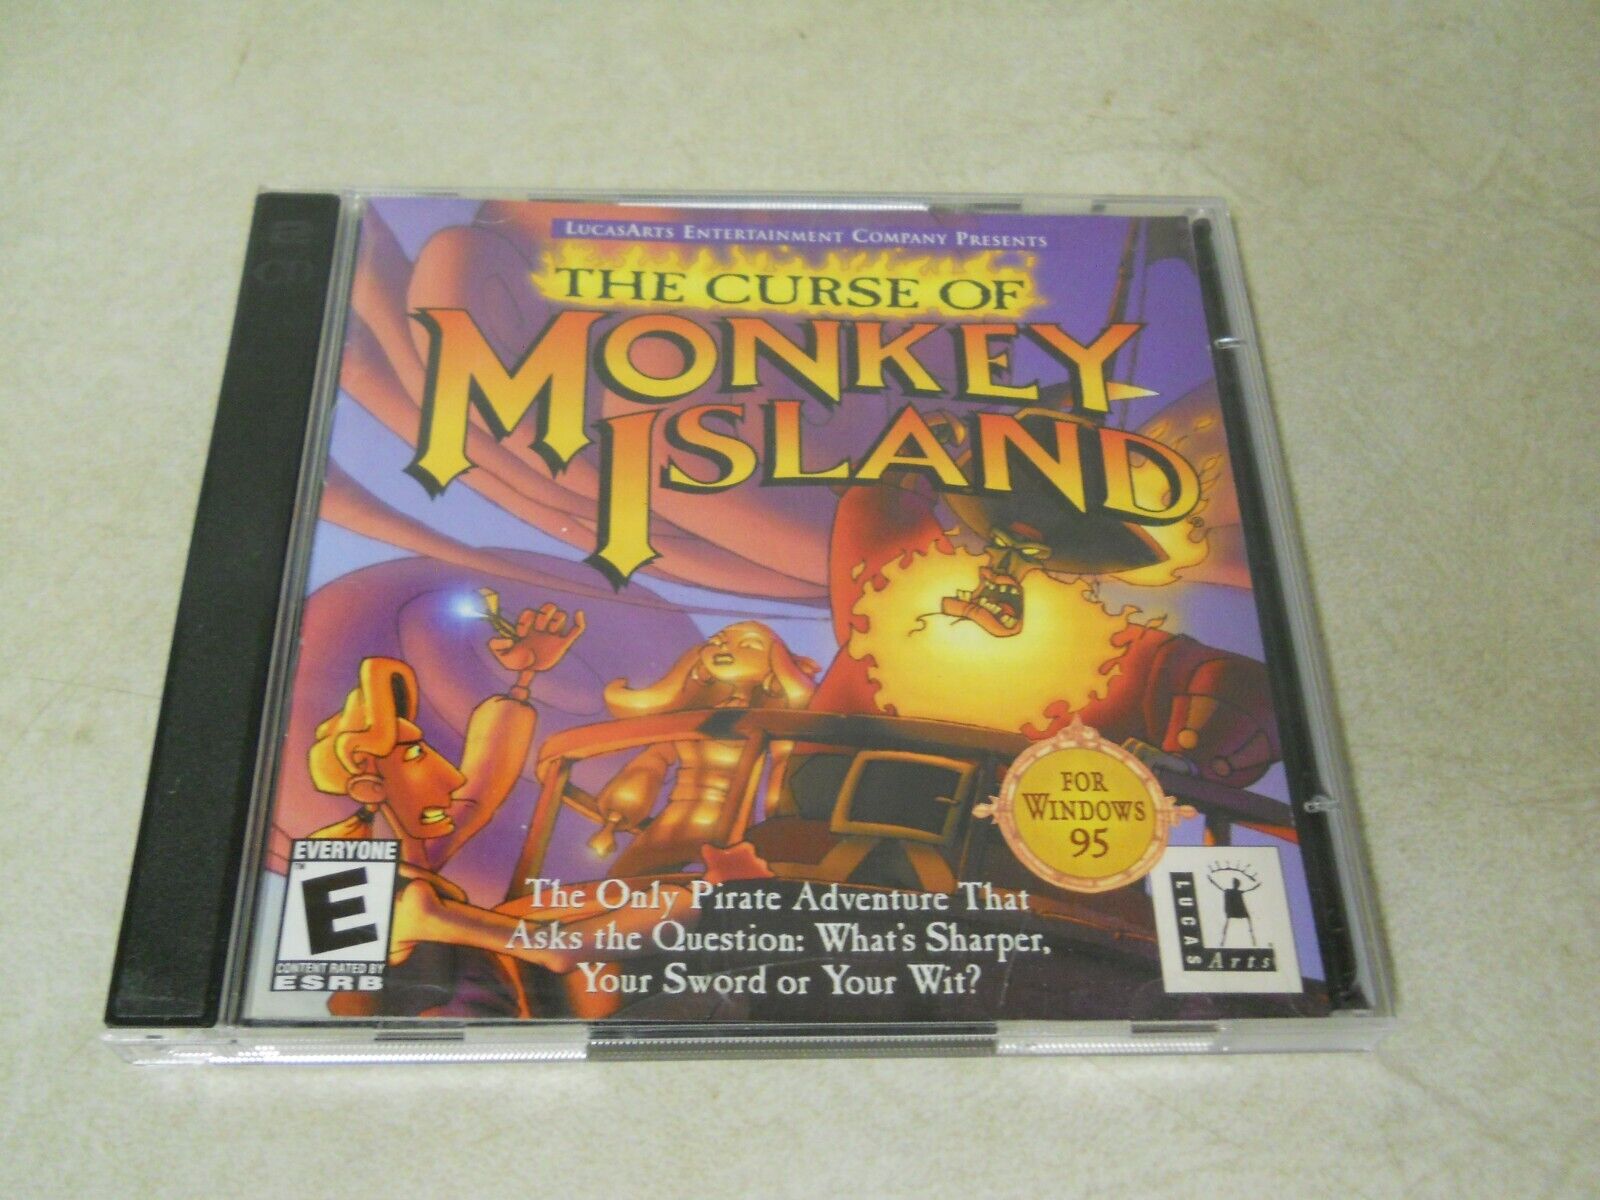 LucasArts 1997 The Curse of Monkey Island PC CD-ROM Video Game Windows 95